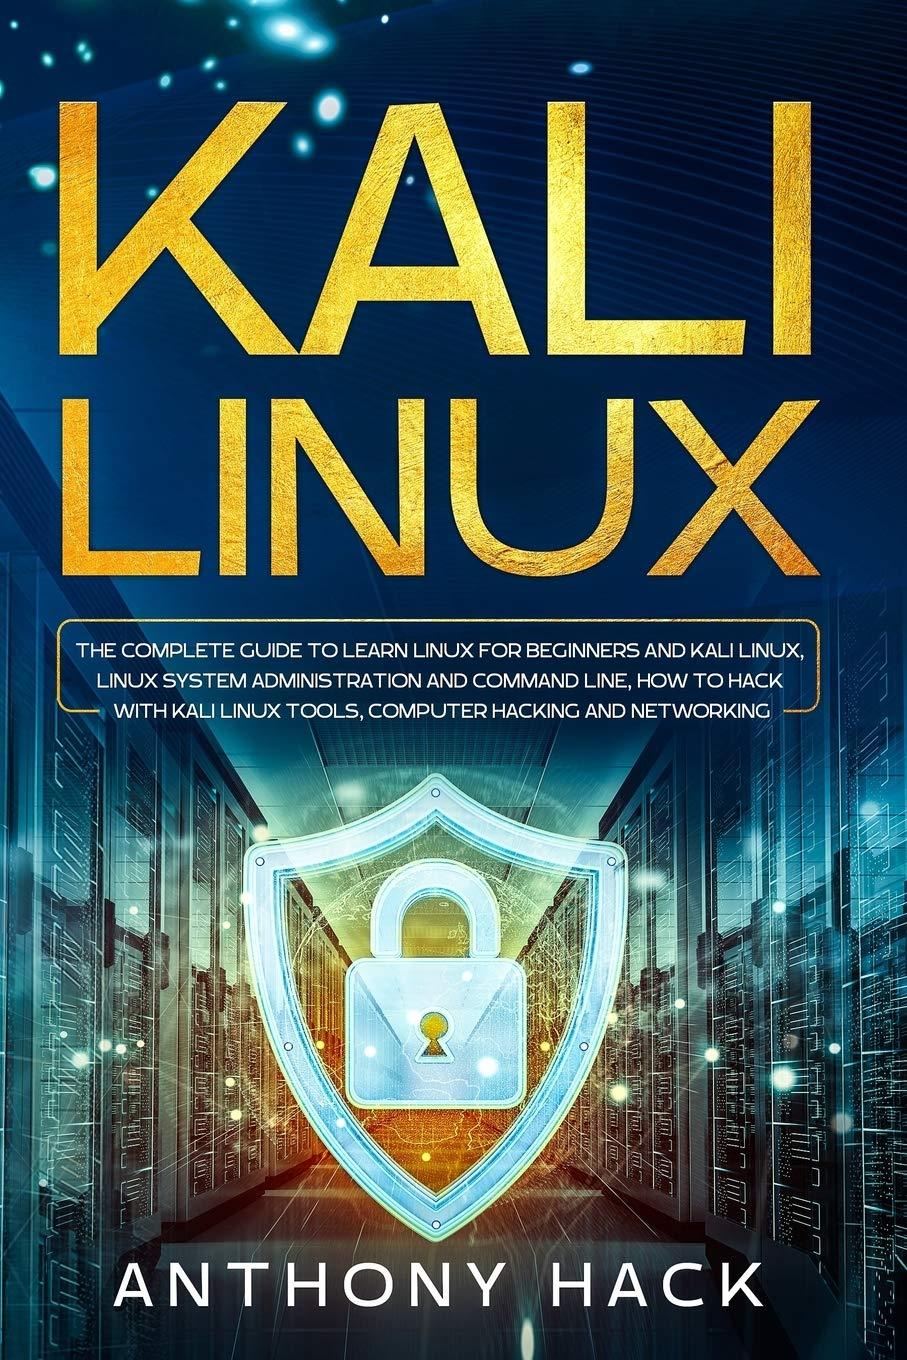 kali linux the complete guide to learn linux for beginners and kali linux linux system administration and